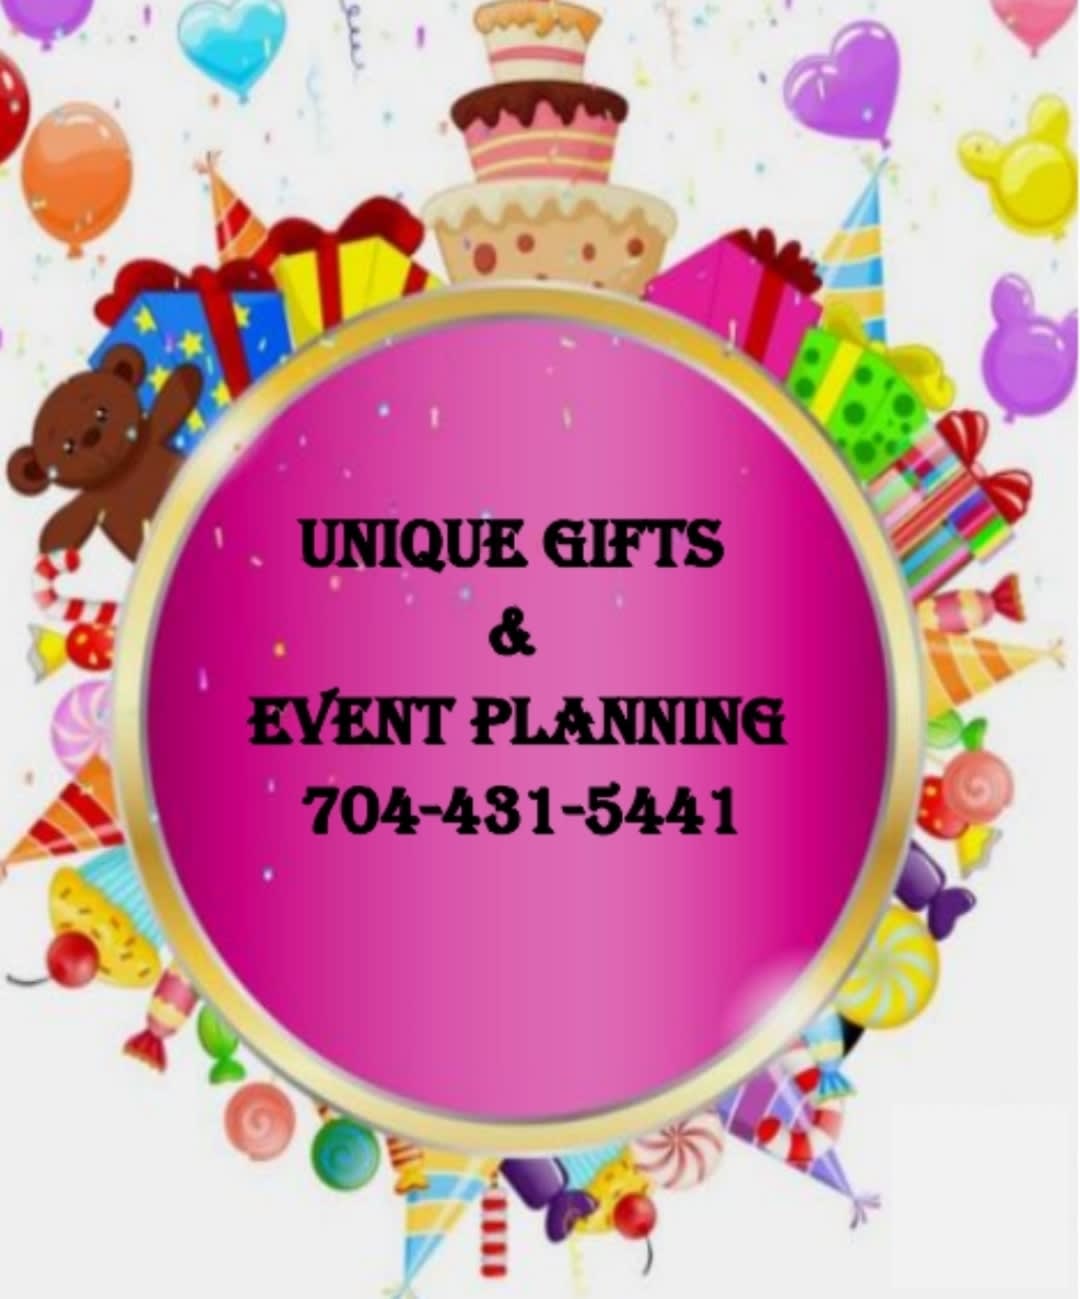 Unique Gifts & Event Planning